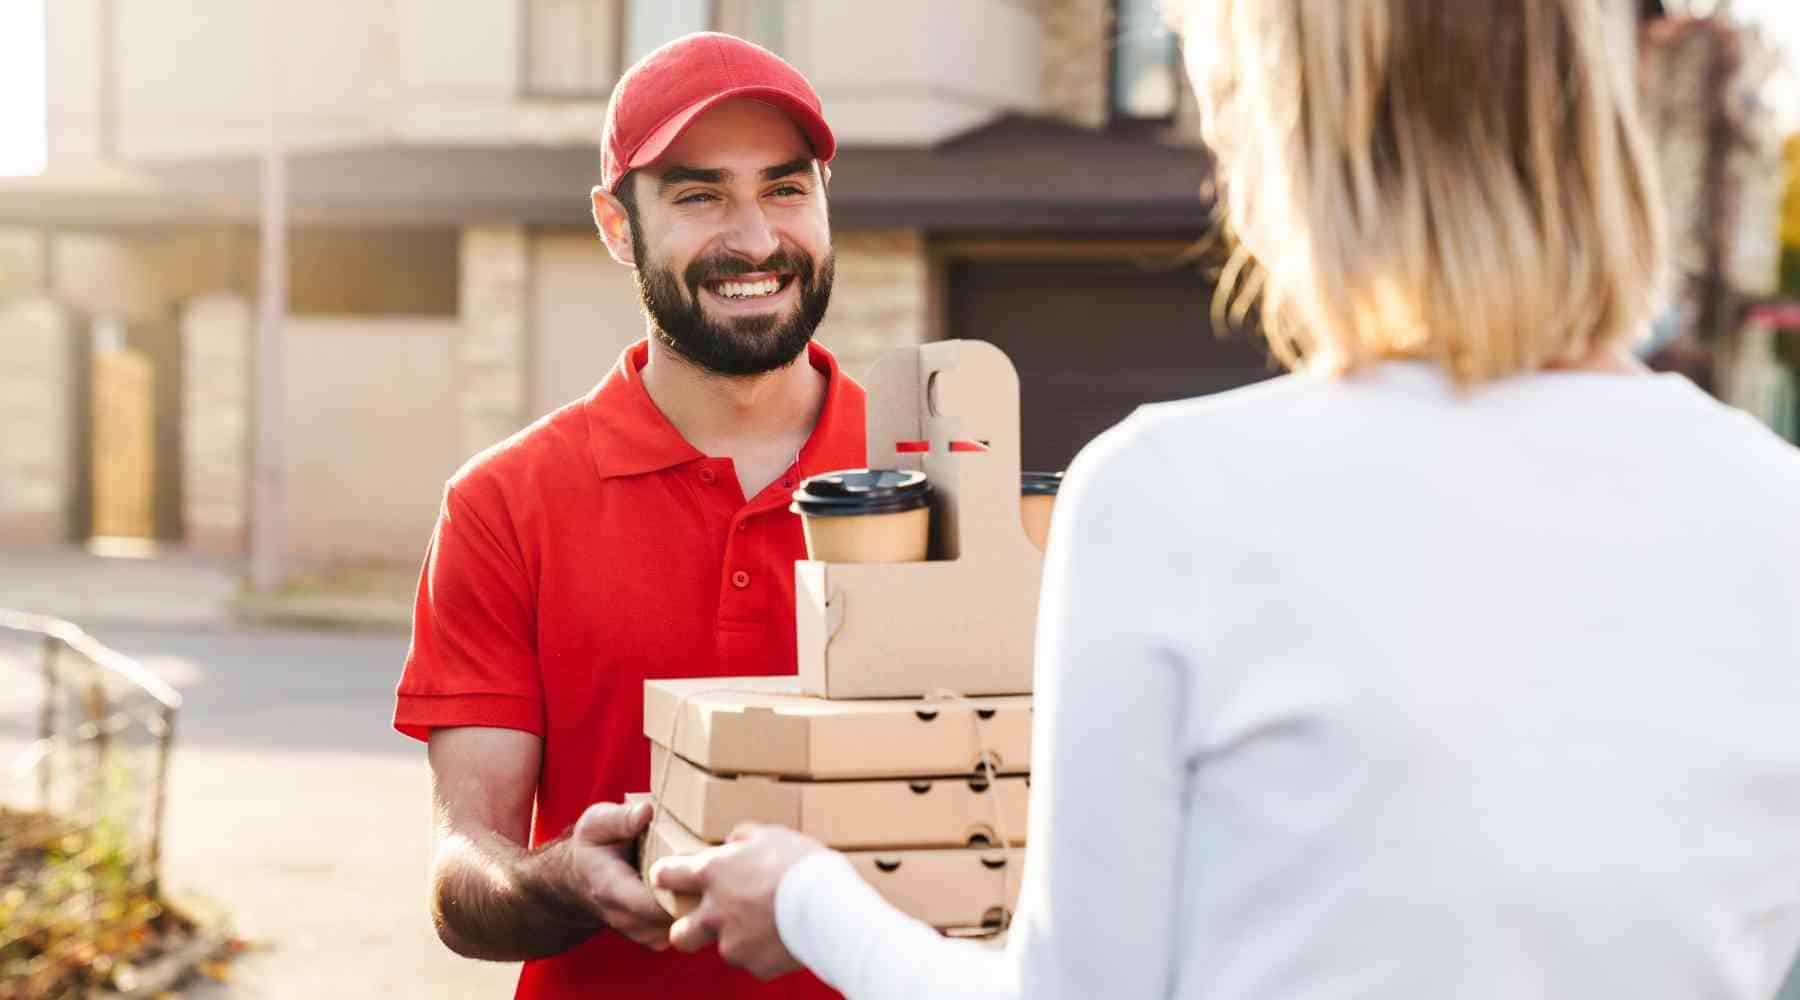 Ways to Make $100 a Day - Food Delivery